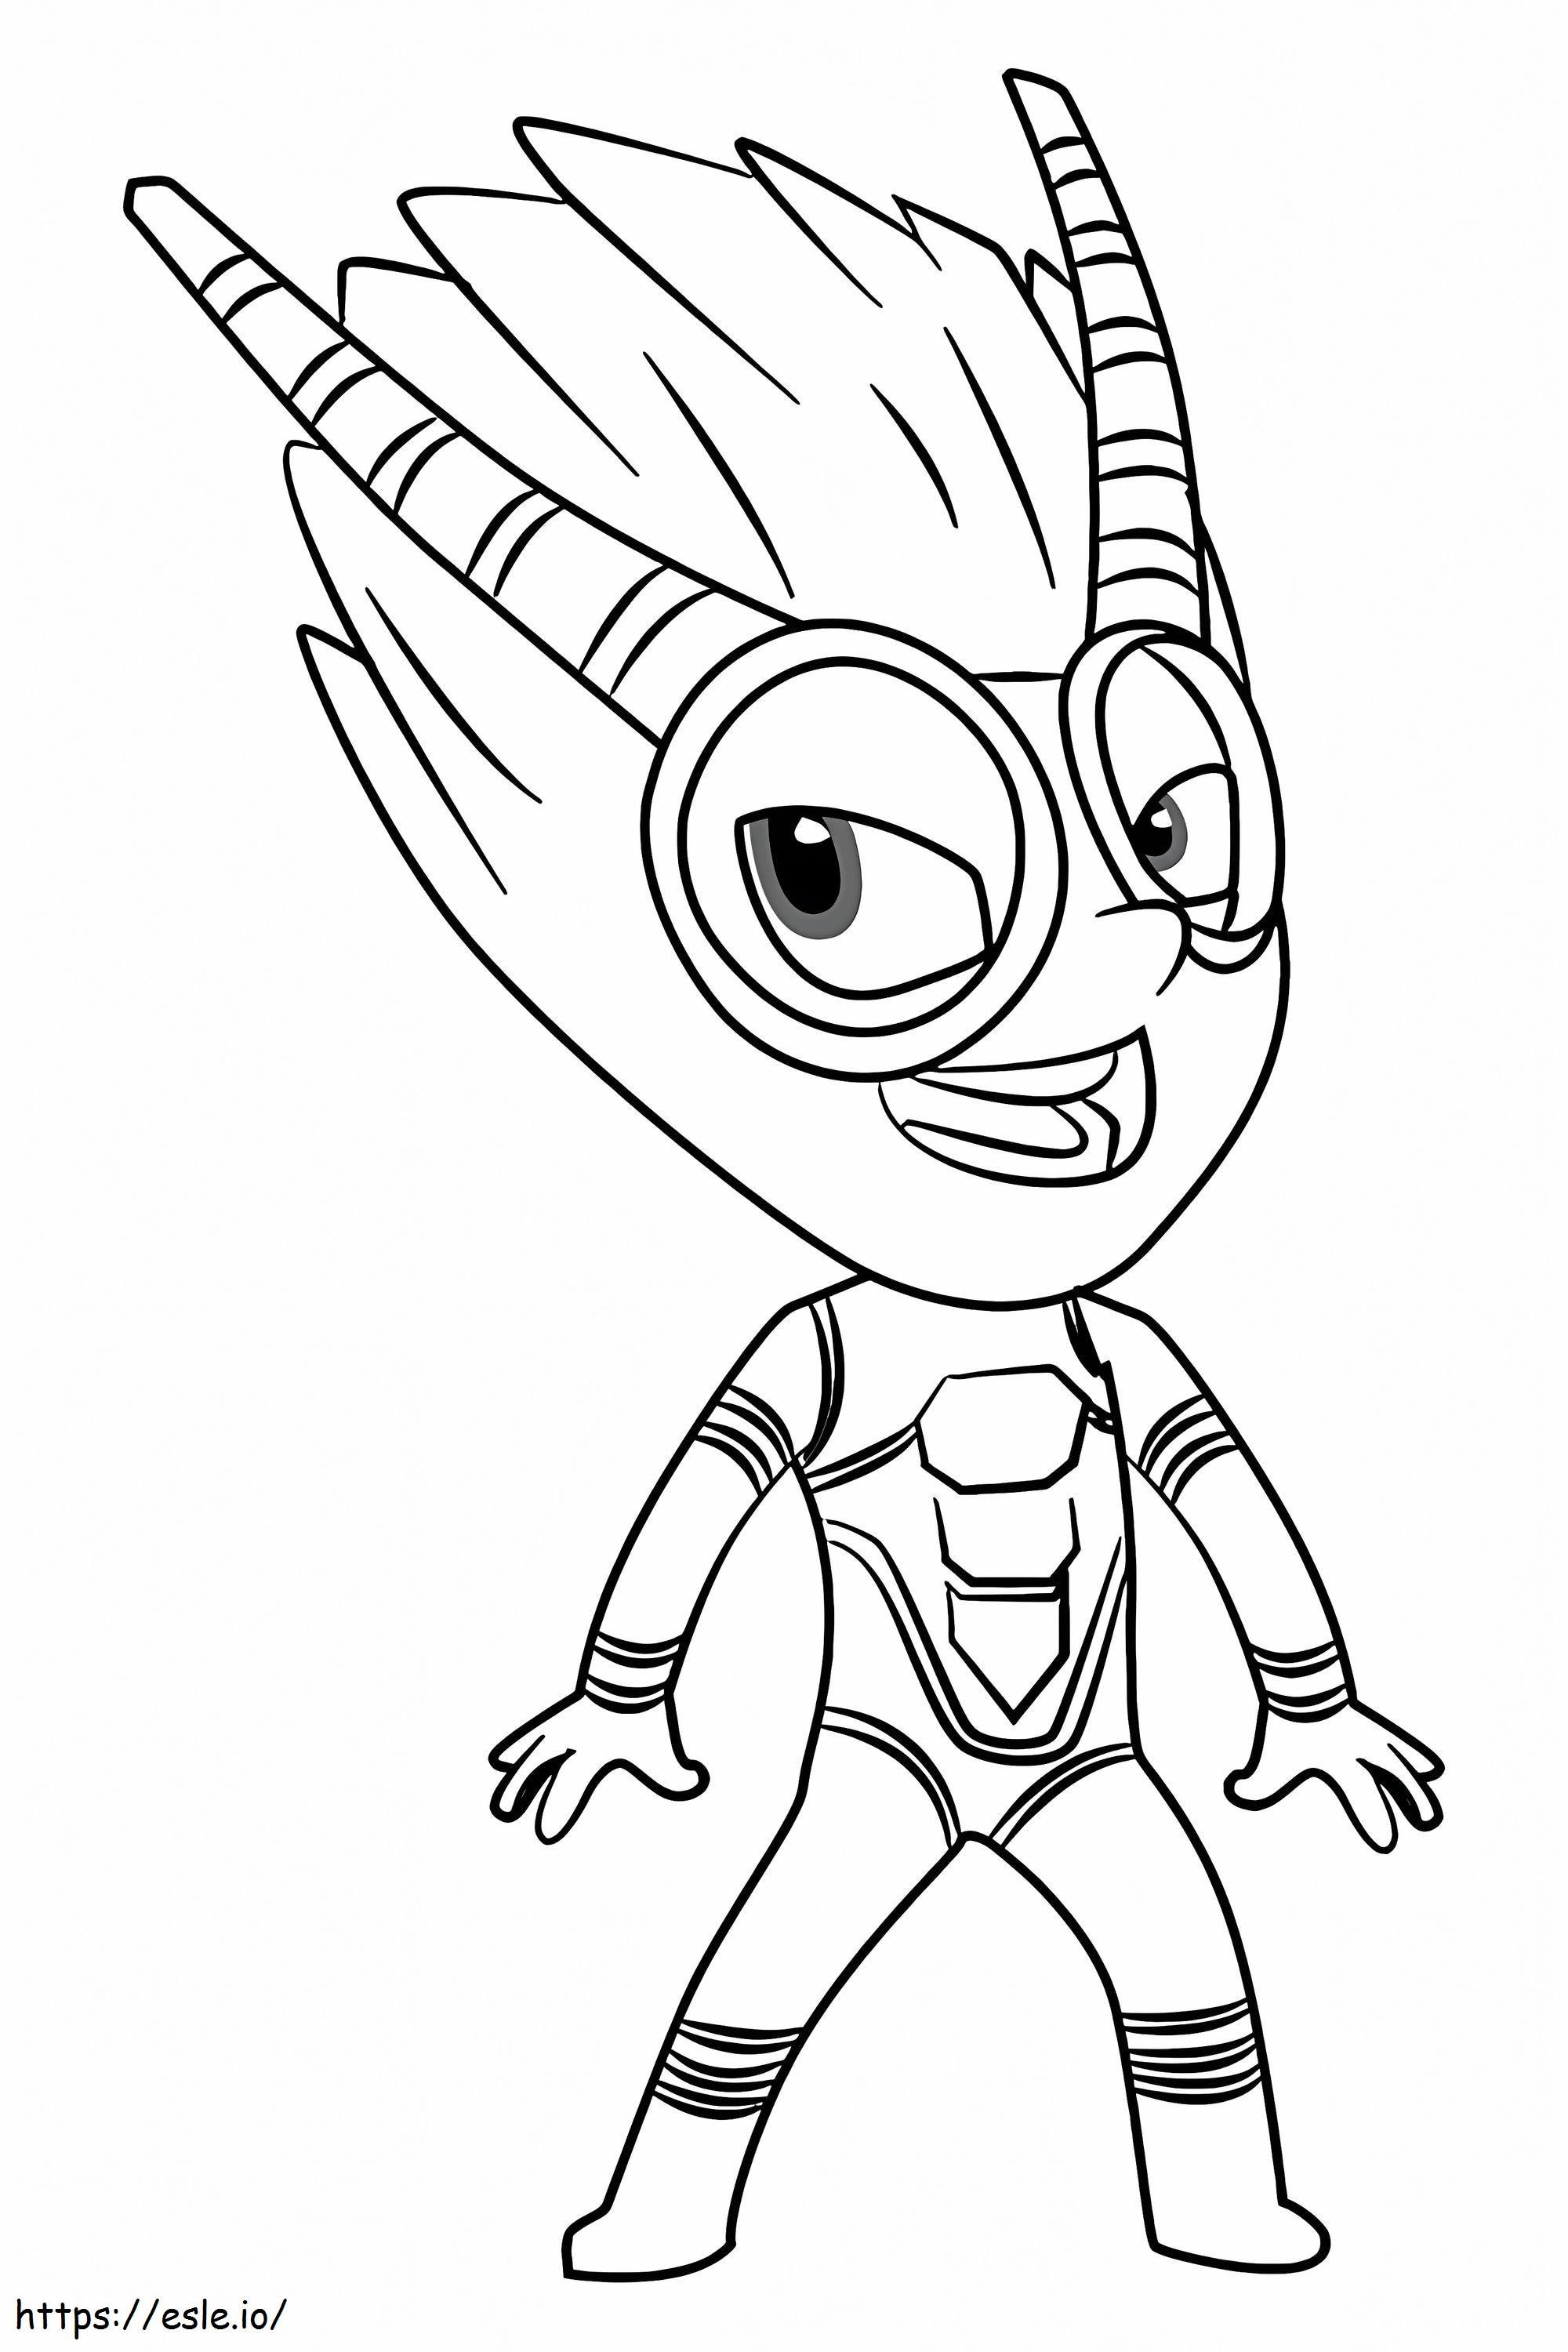 Evil Firefly coloring page